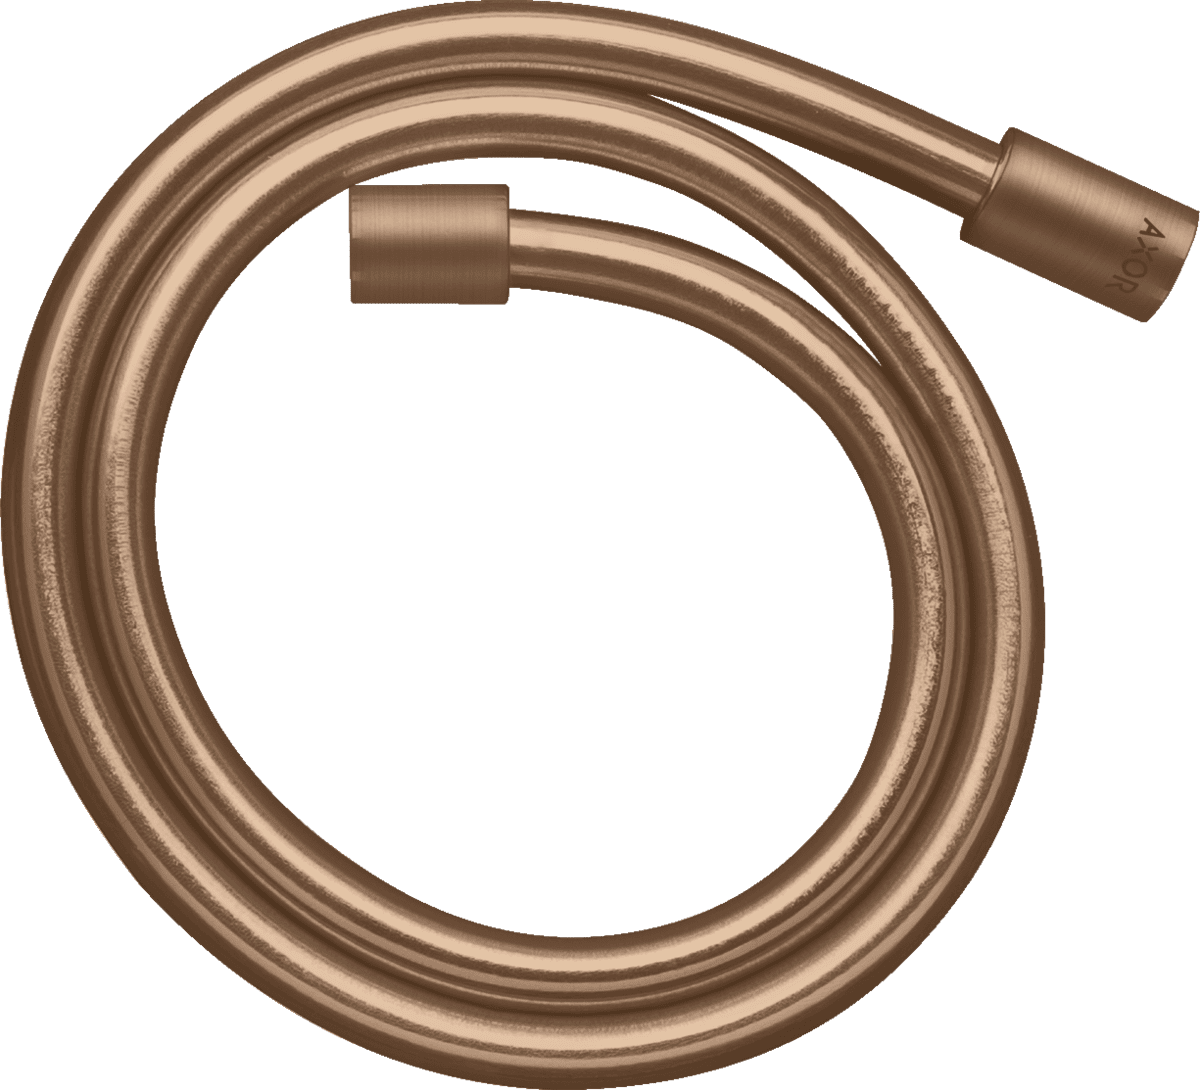 Picture of HANSGROHE AXOR Starck Metal effect shower hose 1.25 m with cylindrical nuts #28282310 - Brushed Red Gold